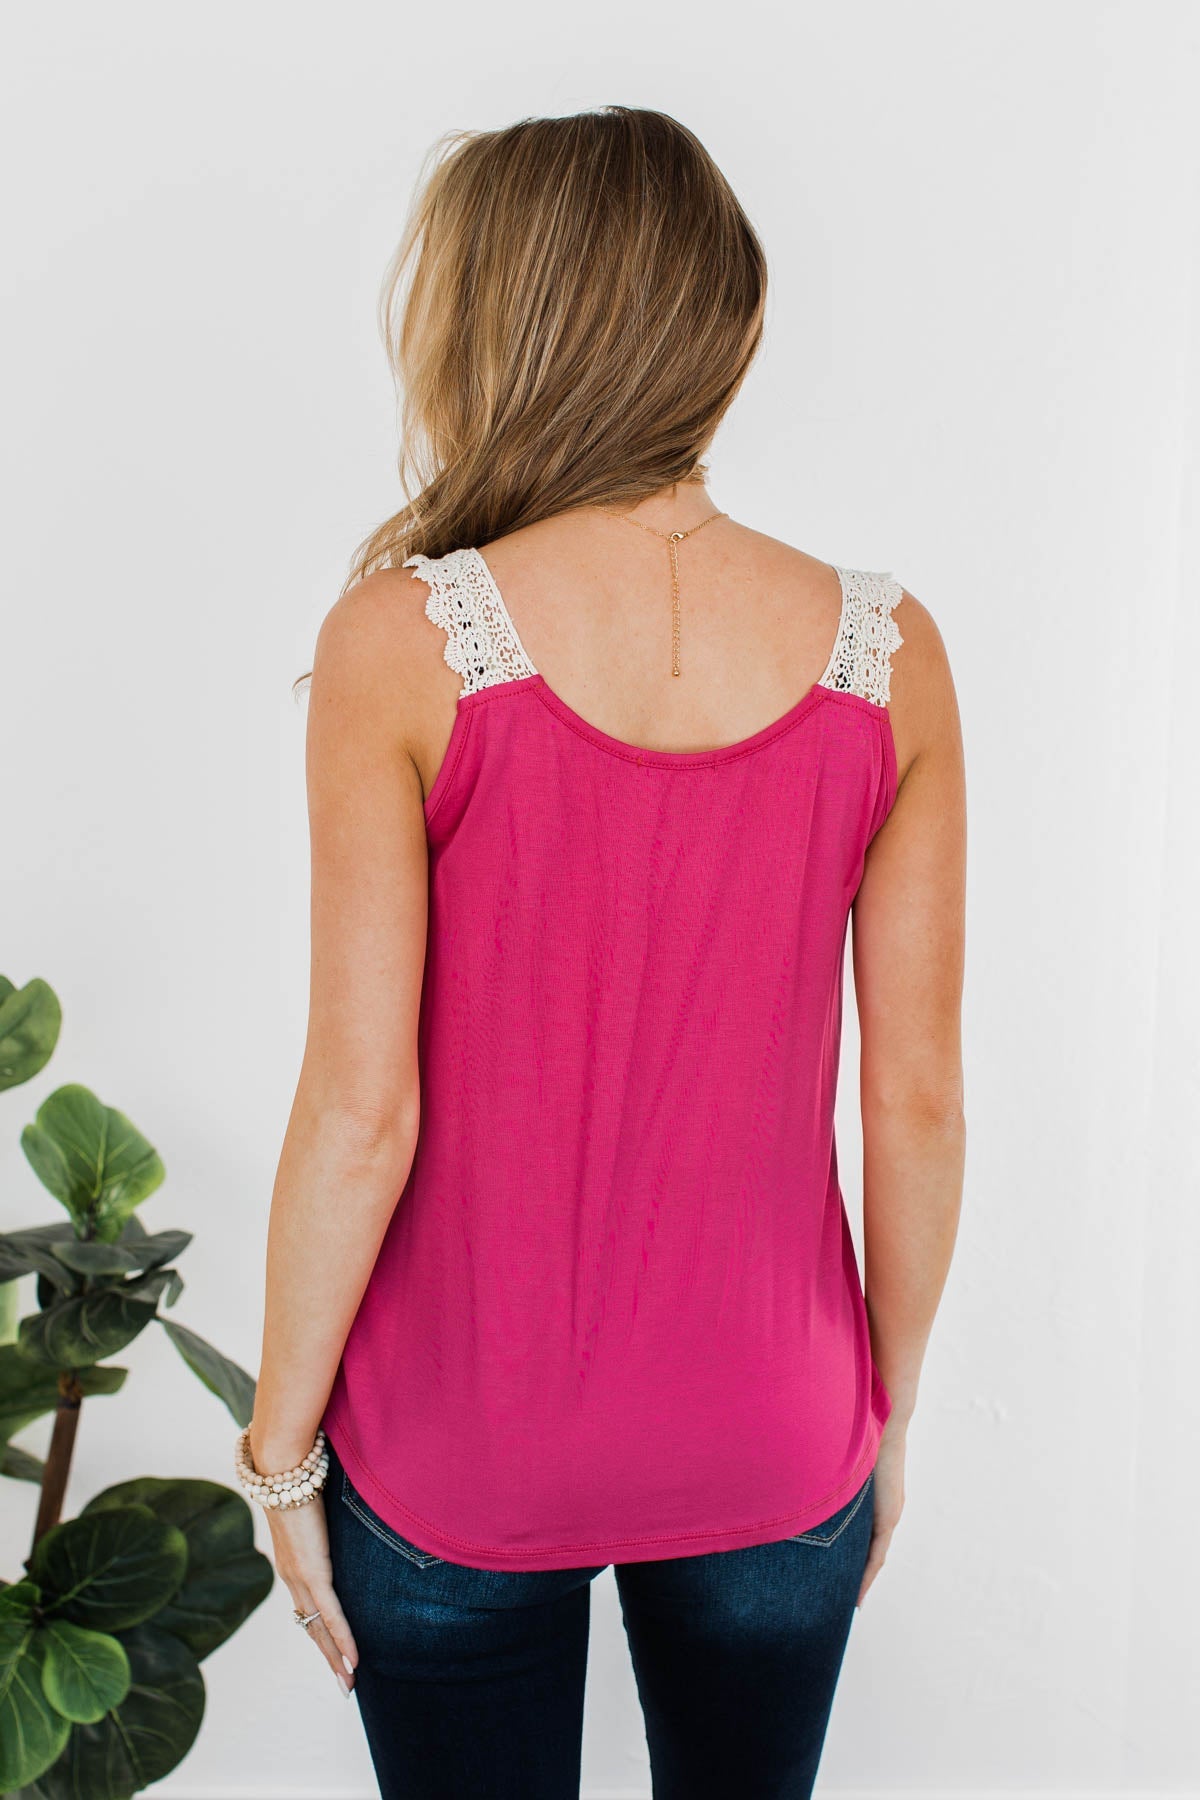 Poetry In Motion Tank- Fuchsia